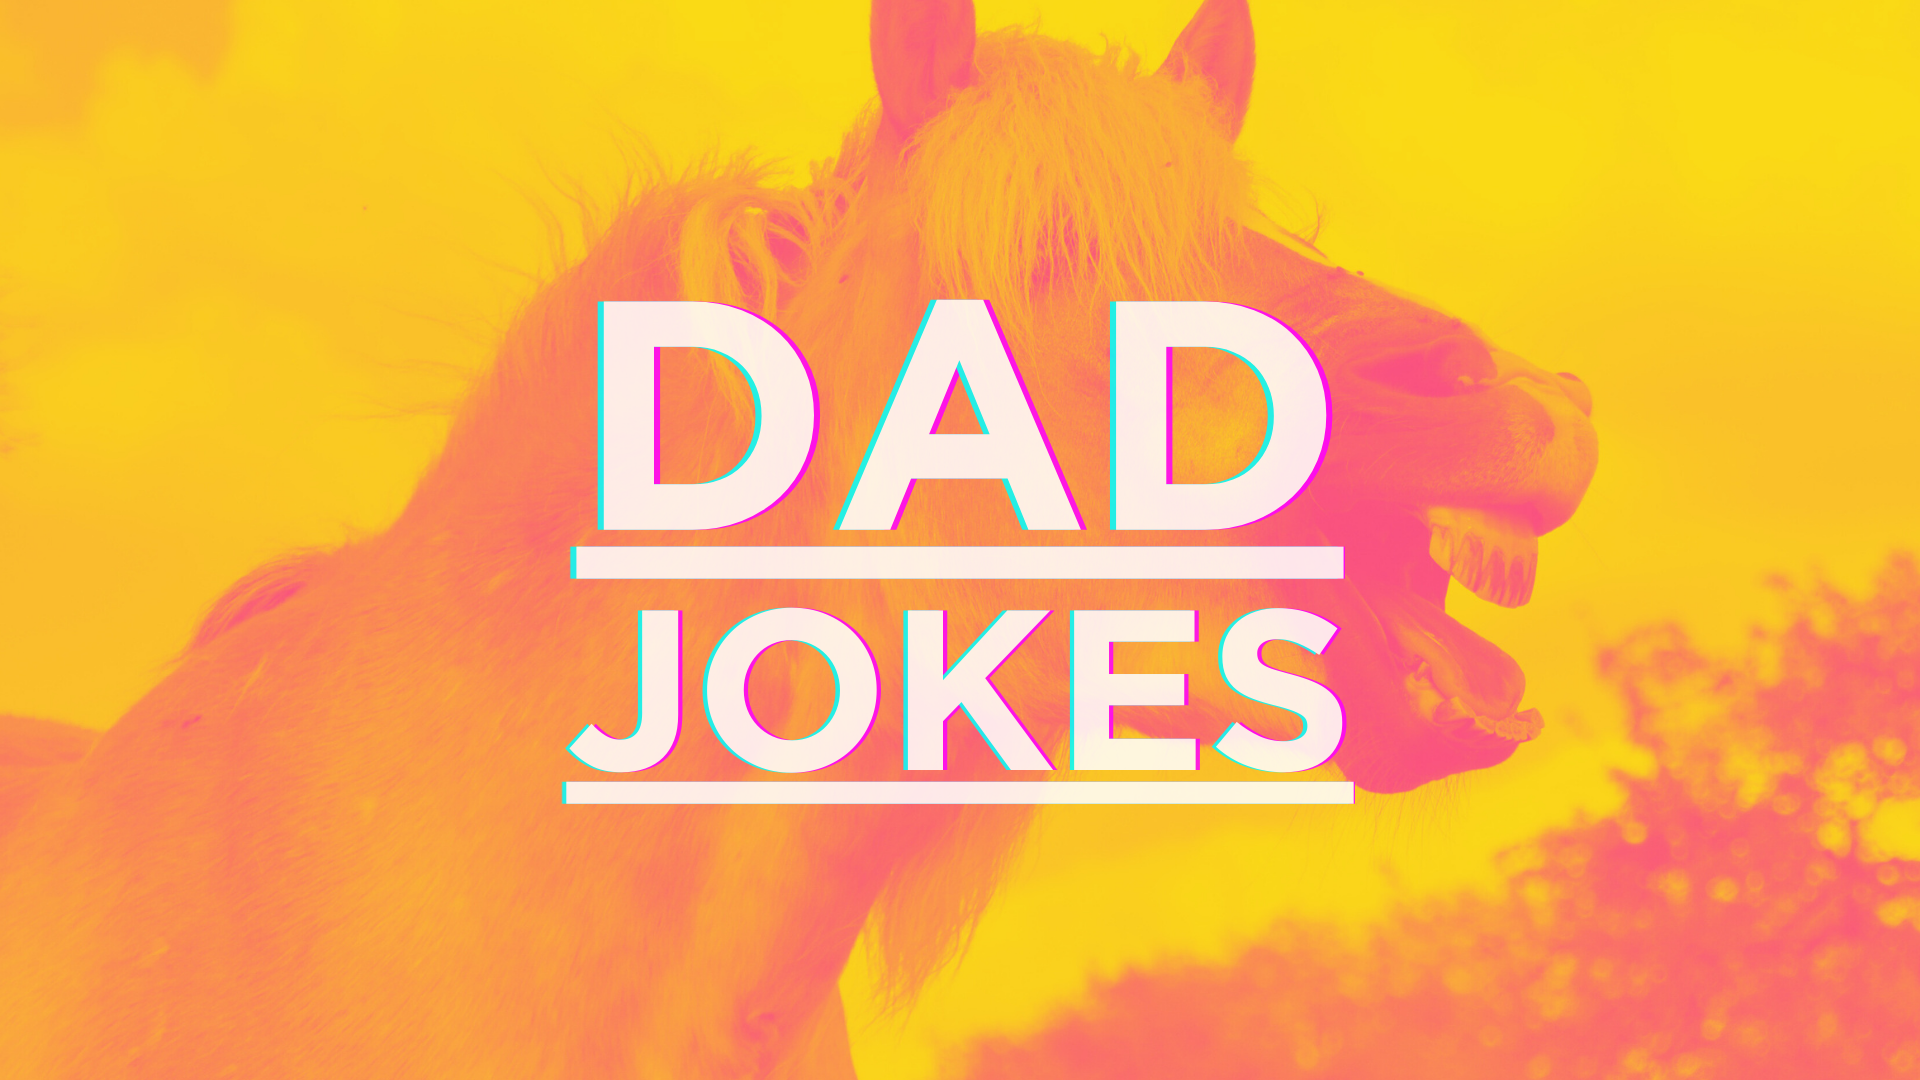 Dad jokes to make your day better